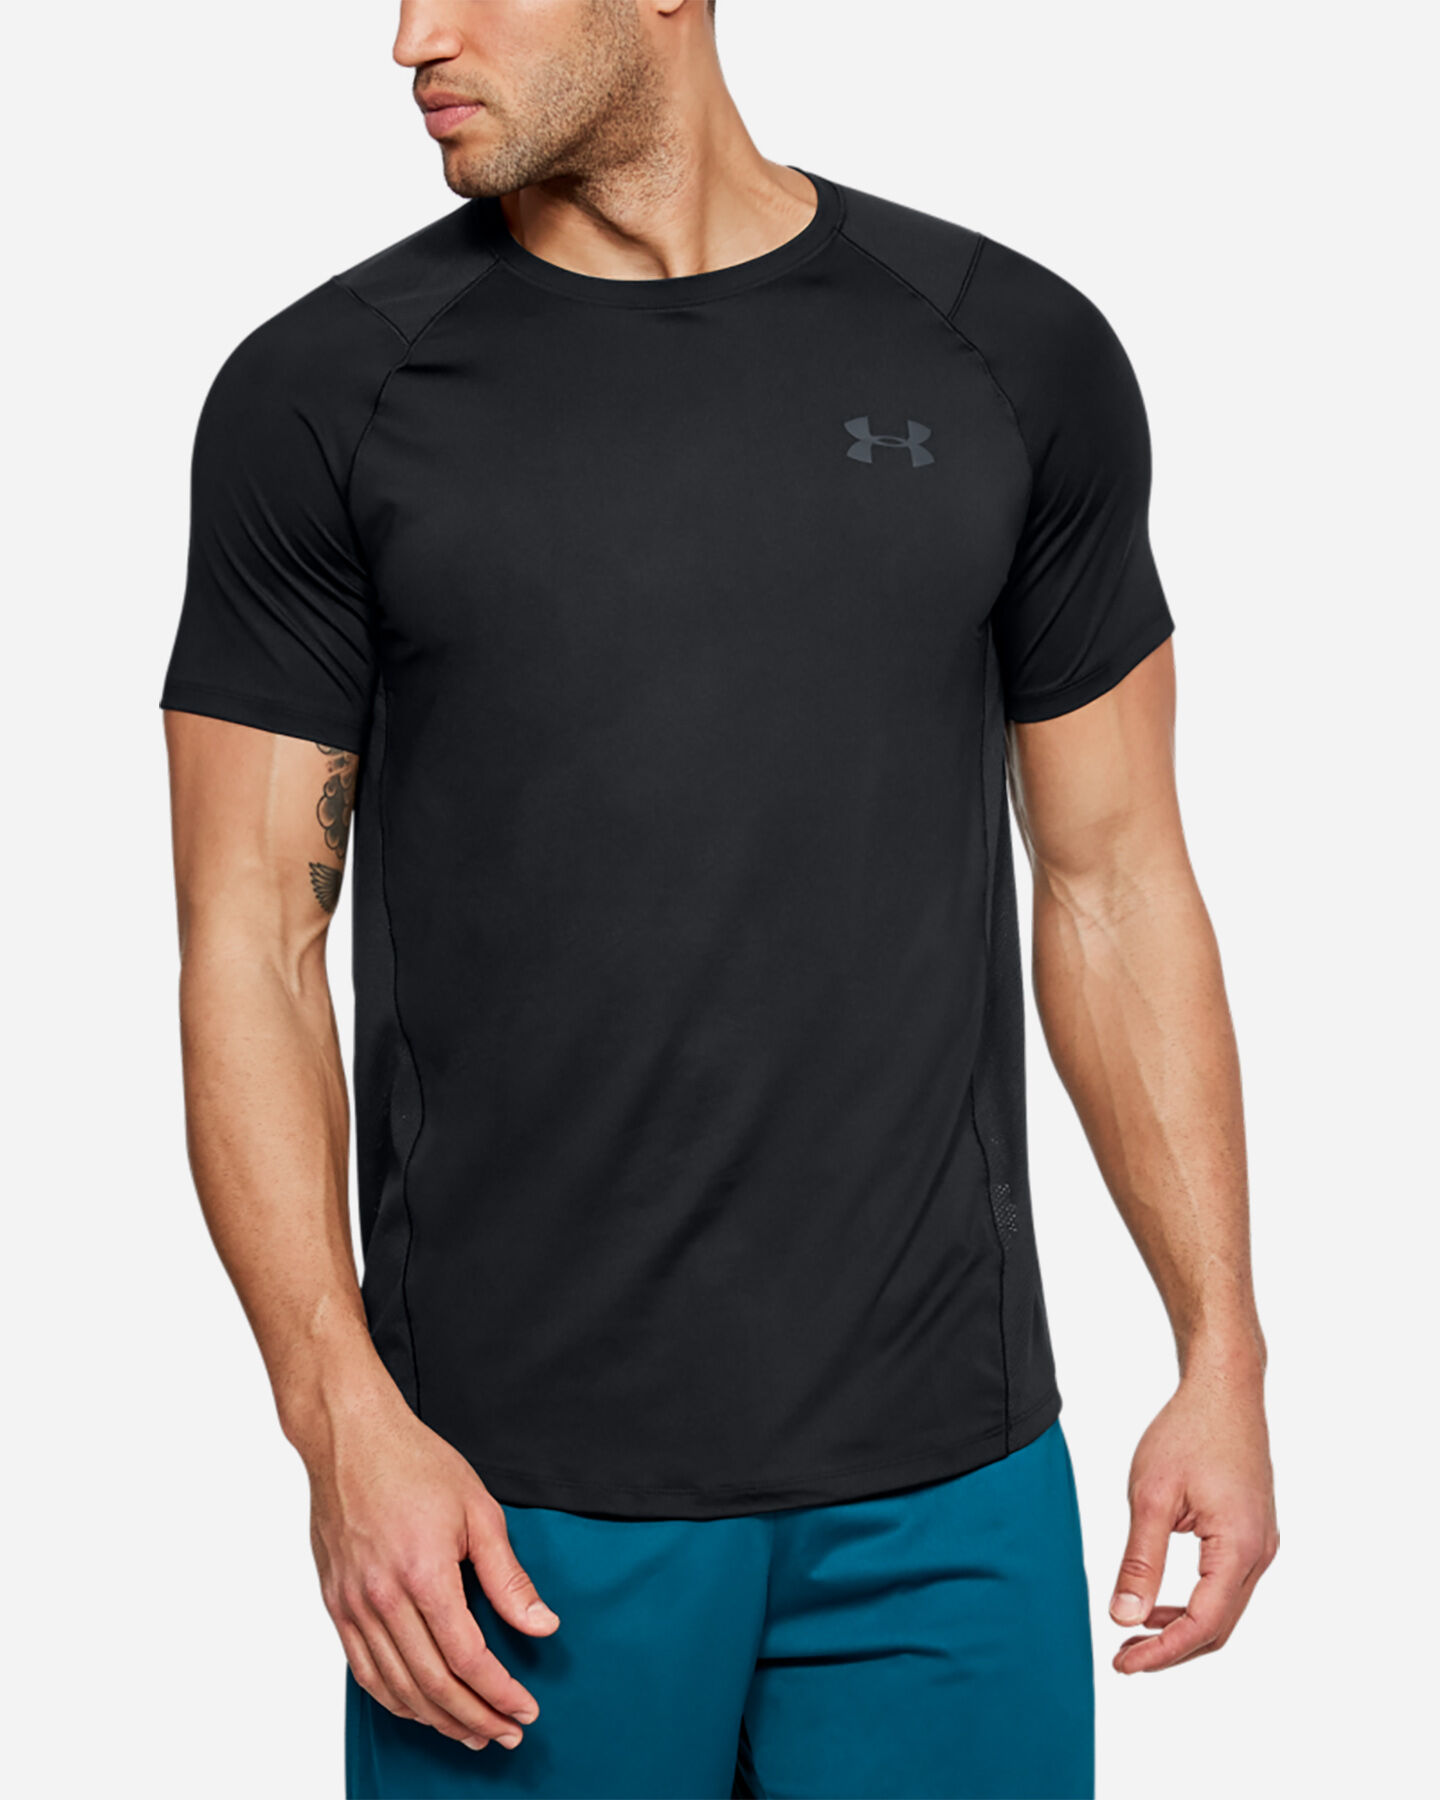  T-Shirt training UNDER ARMOUR MK1 M S2025352|0001|SM scatto 2